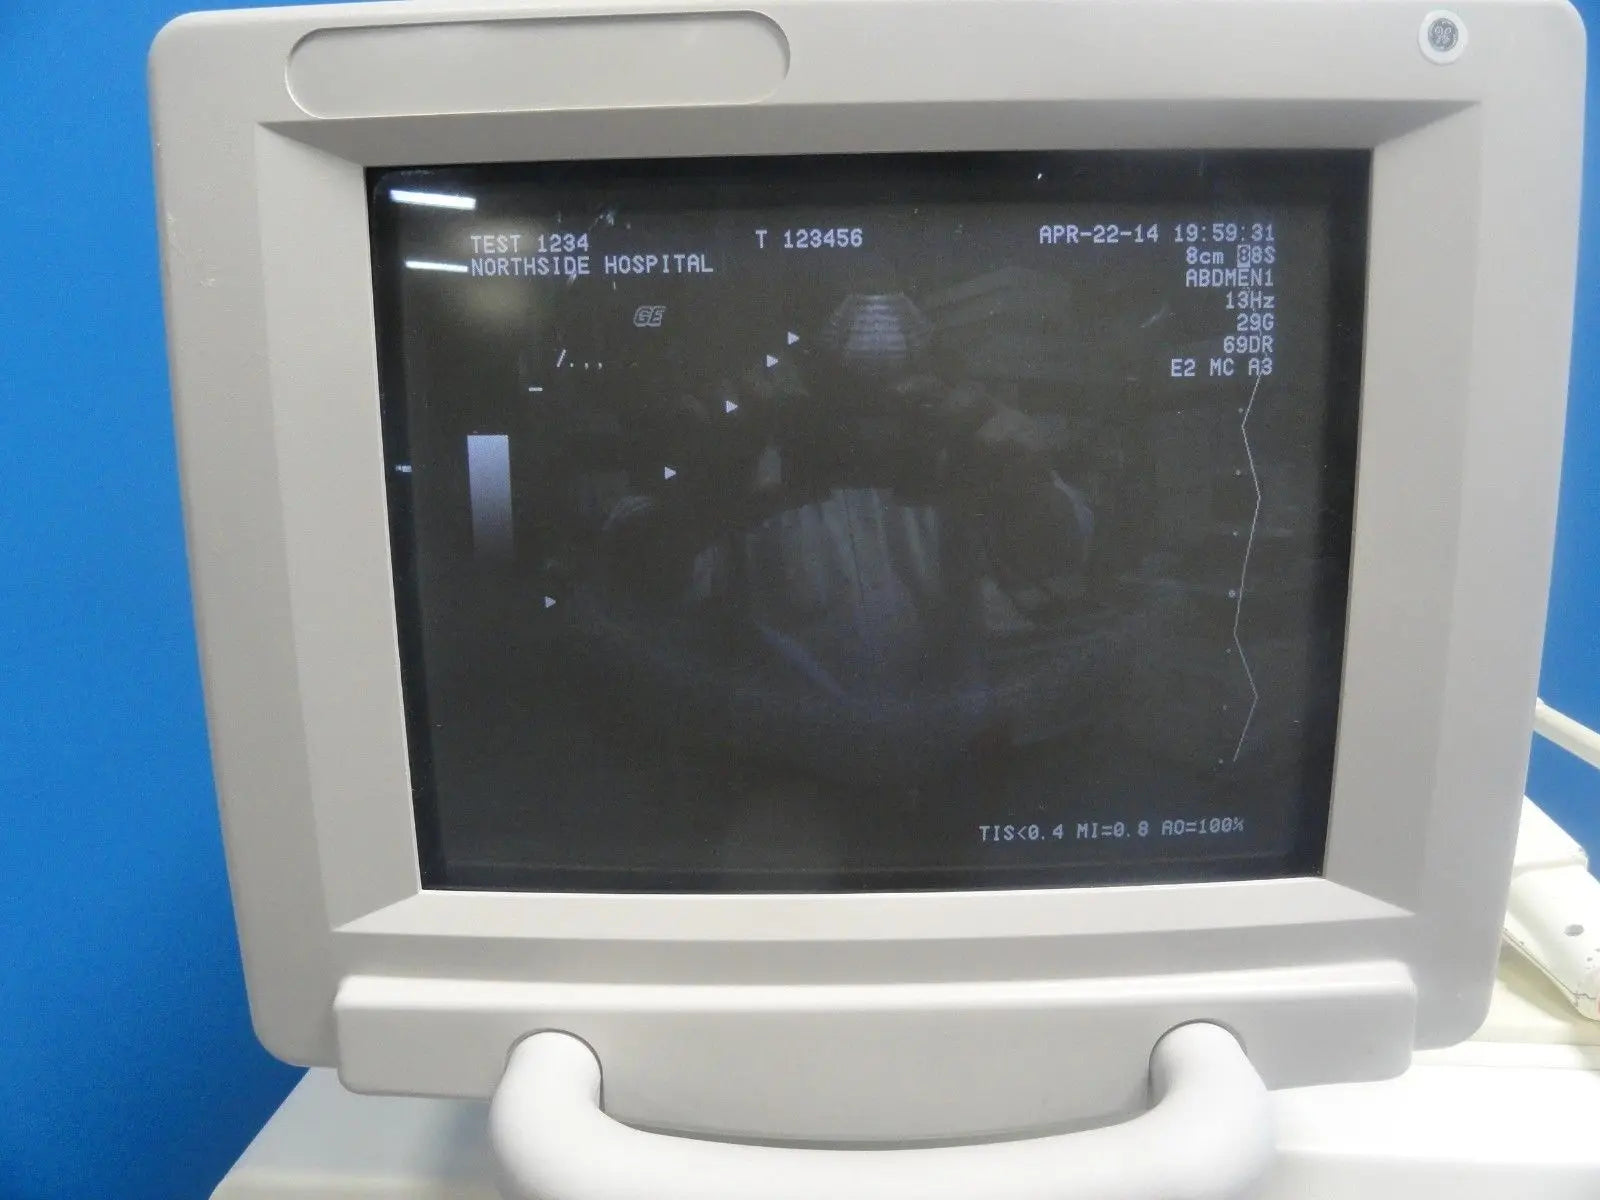 2001 GE 8S P/N 2266327 Cardiac Sector Ultrasound Transducer W/ Hook (6693) DIAGNOSTIC ULTRASOUND MACHINES FOR SALE